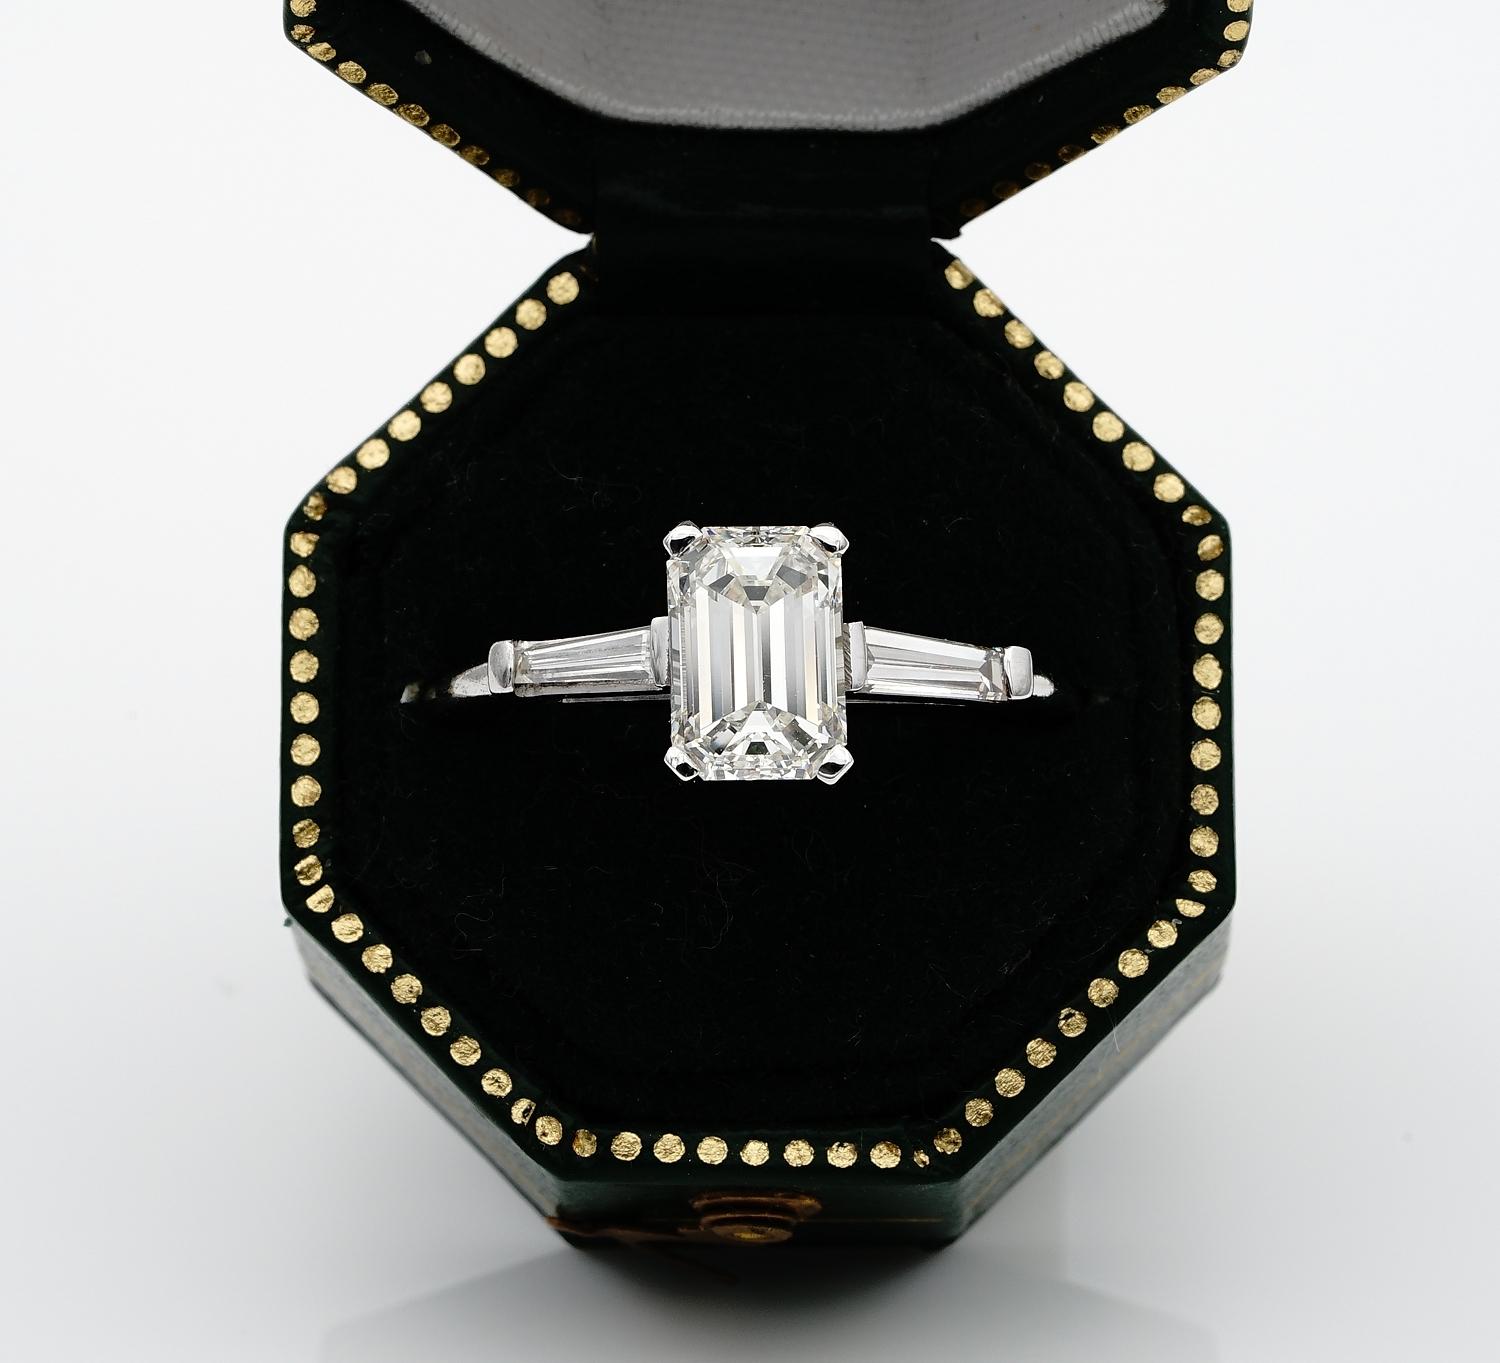 Most desired!

Known for their sophisticated rectangular shape and geometric facets, the clean lines and angles of Emerald cut Diamonds make them an exceptional choice for the centrepiece of an engagement ring
What to say of having an engagement